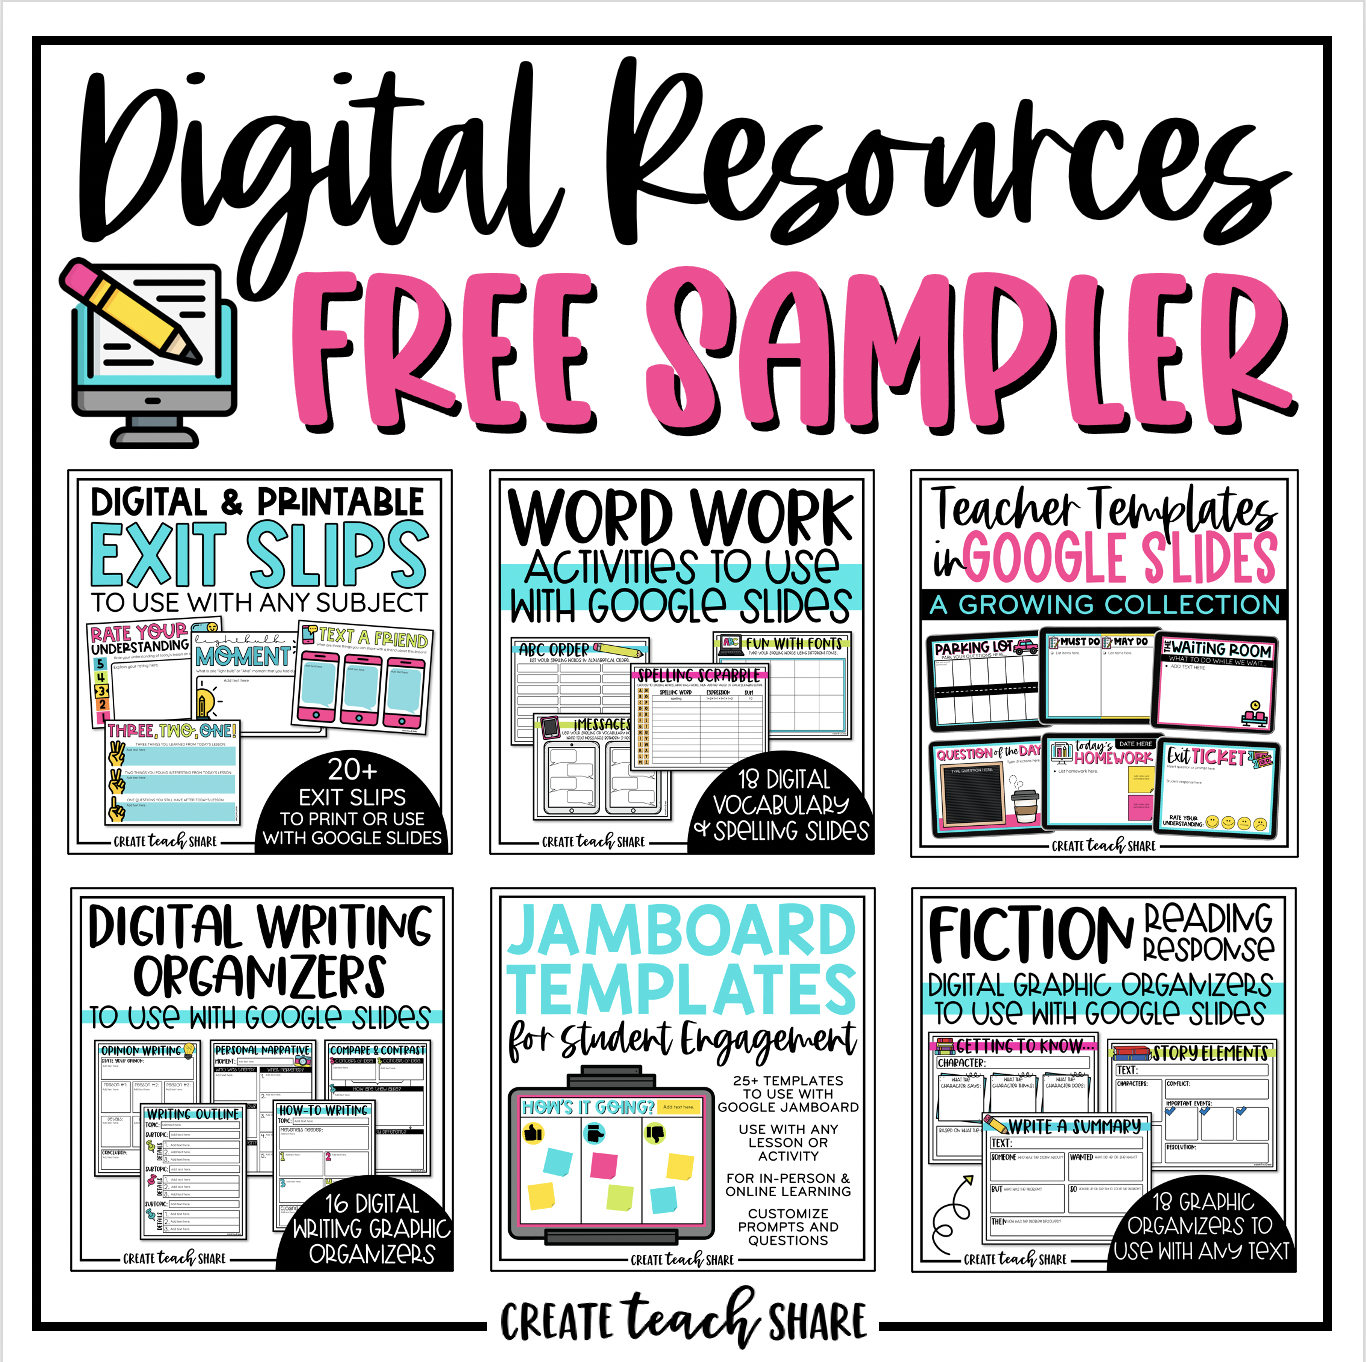 Free sample resources